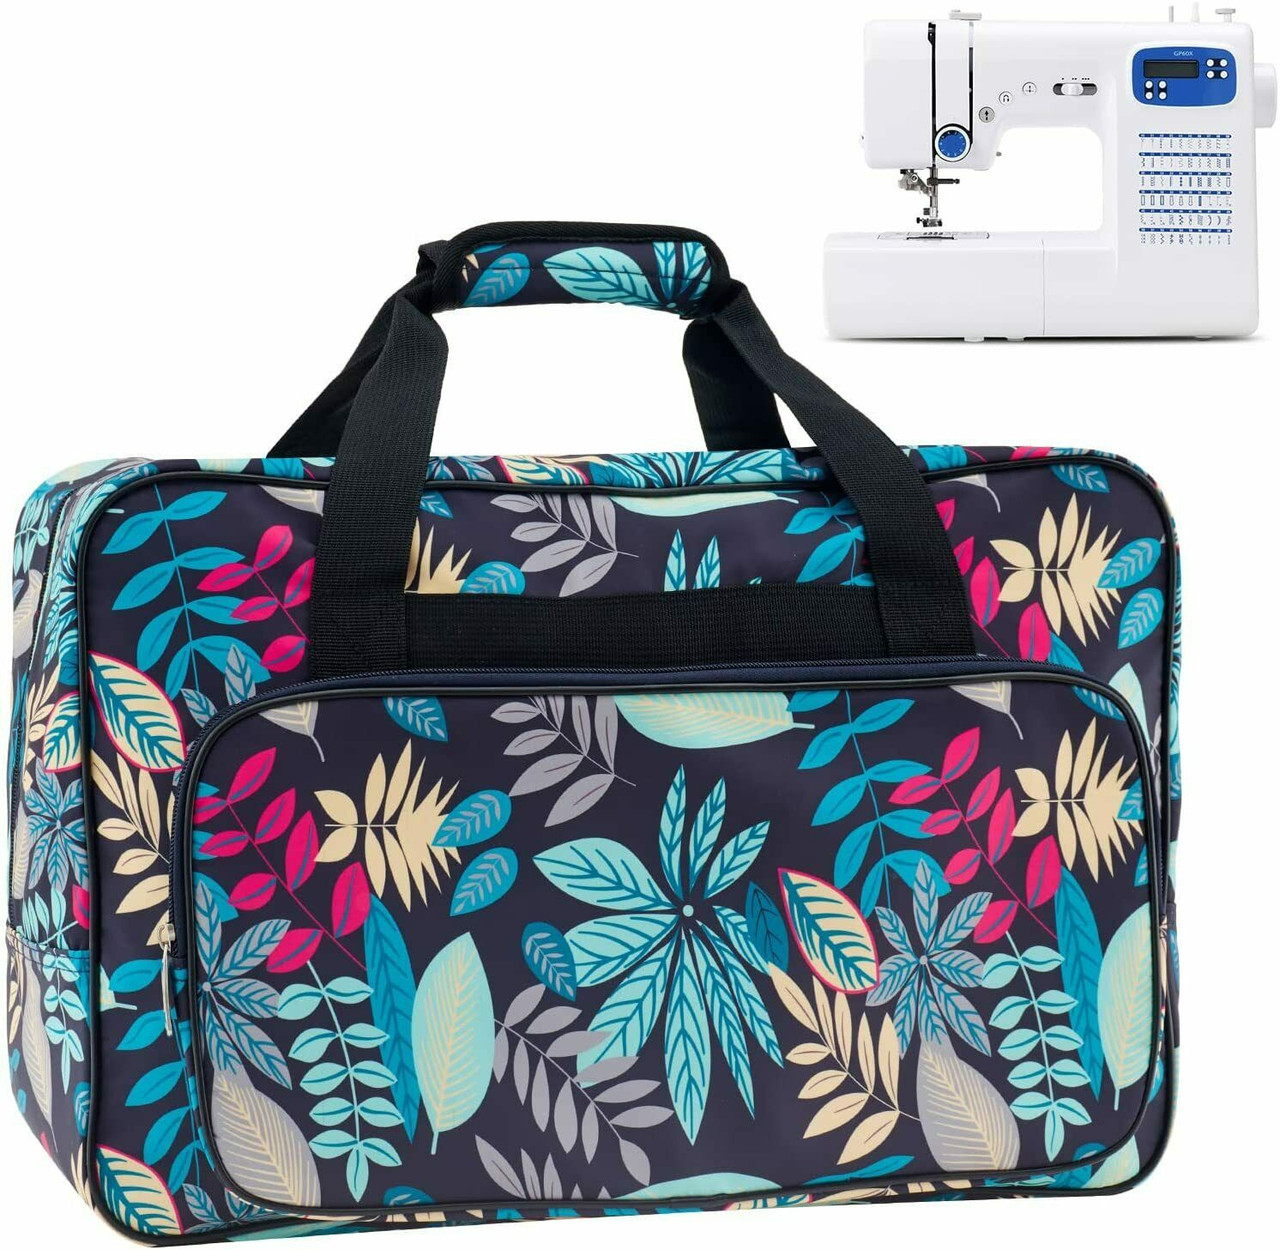 Sewing Machine Carrying Case with Multiple Storage Pockets, Universal Tote Bag with Shoulder Strap Compatible with Most Standard Singer, Brother